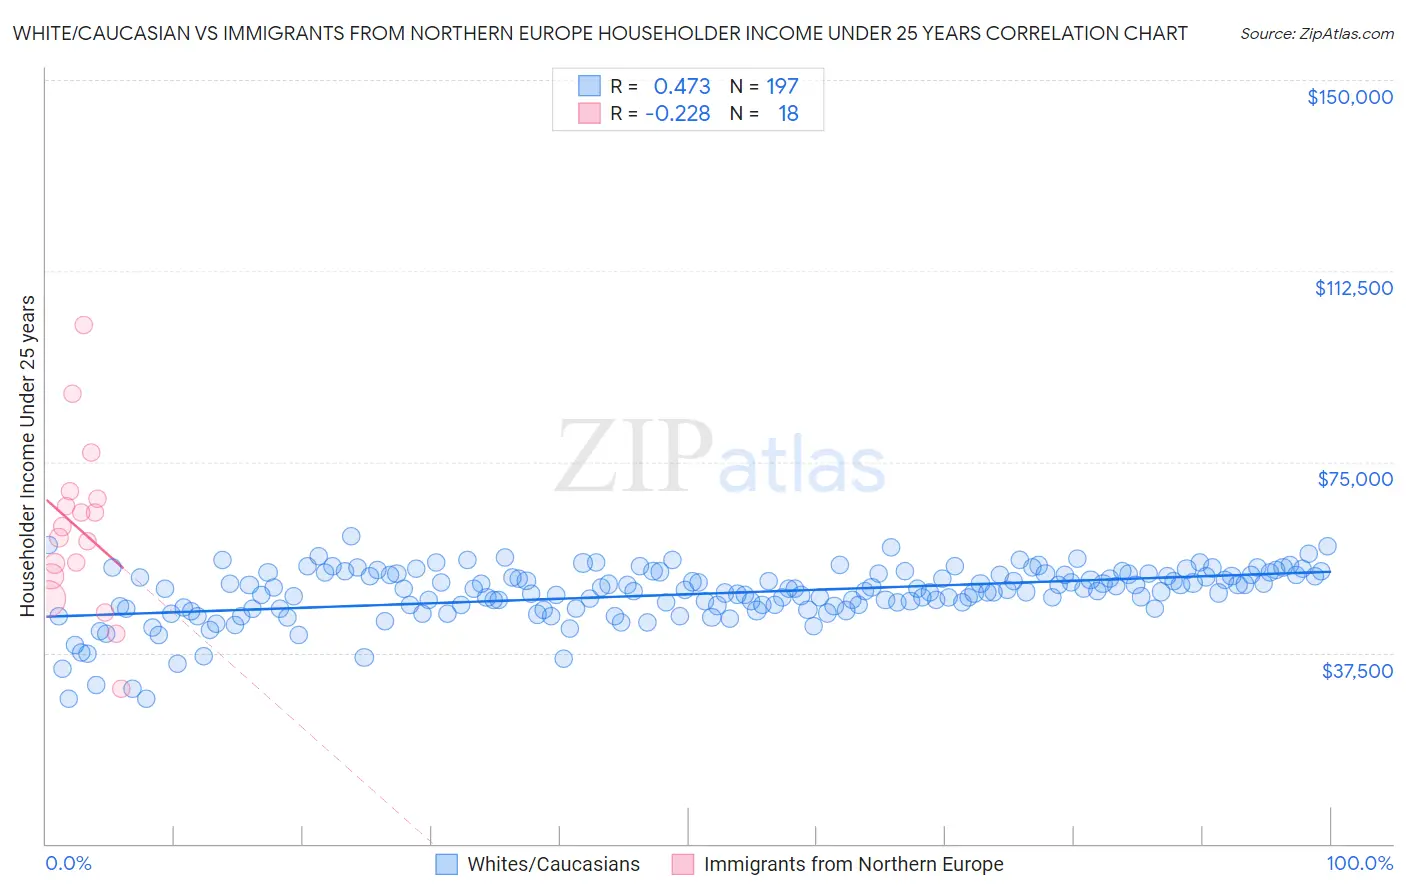 White/Caucasian vs Immigrants from Northern Europe Householder Income Under 25 years